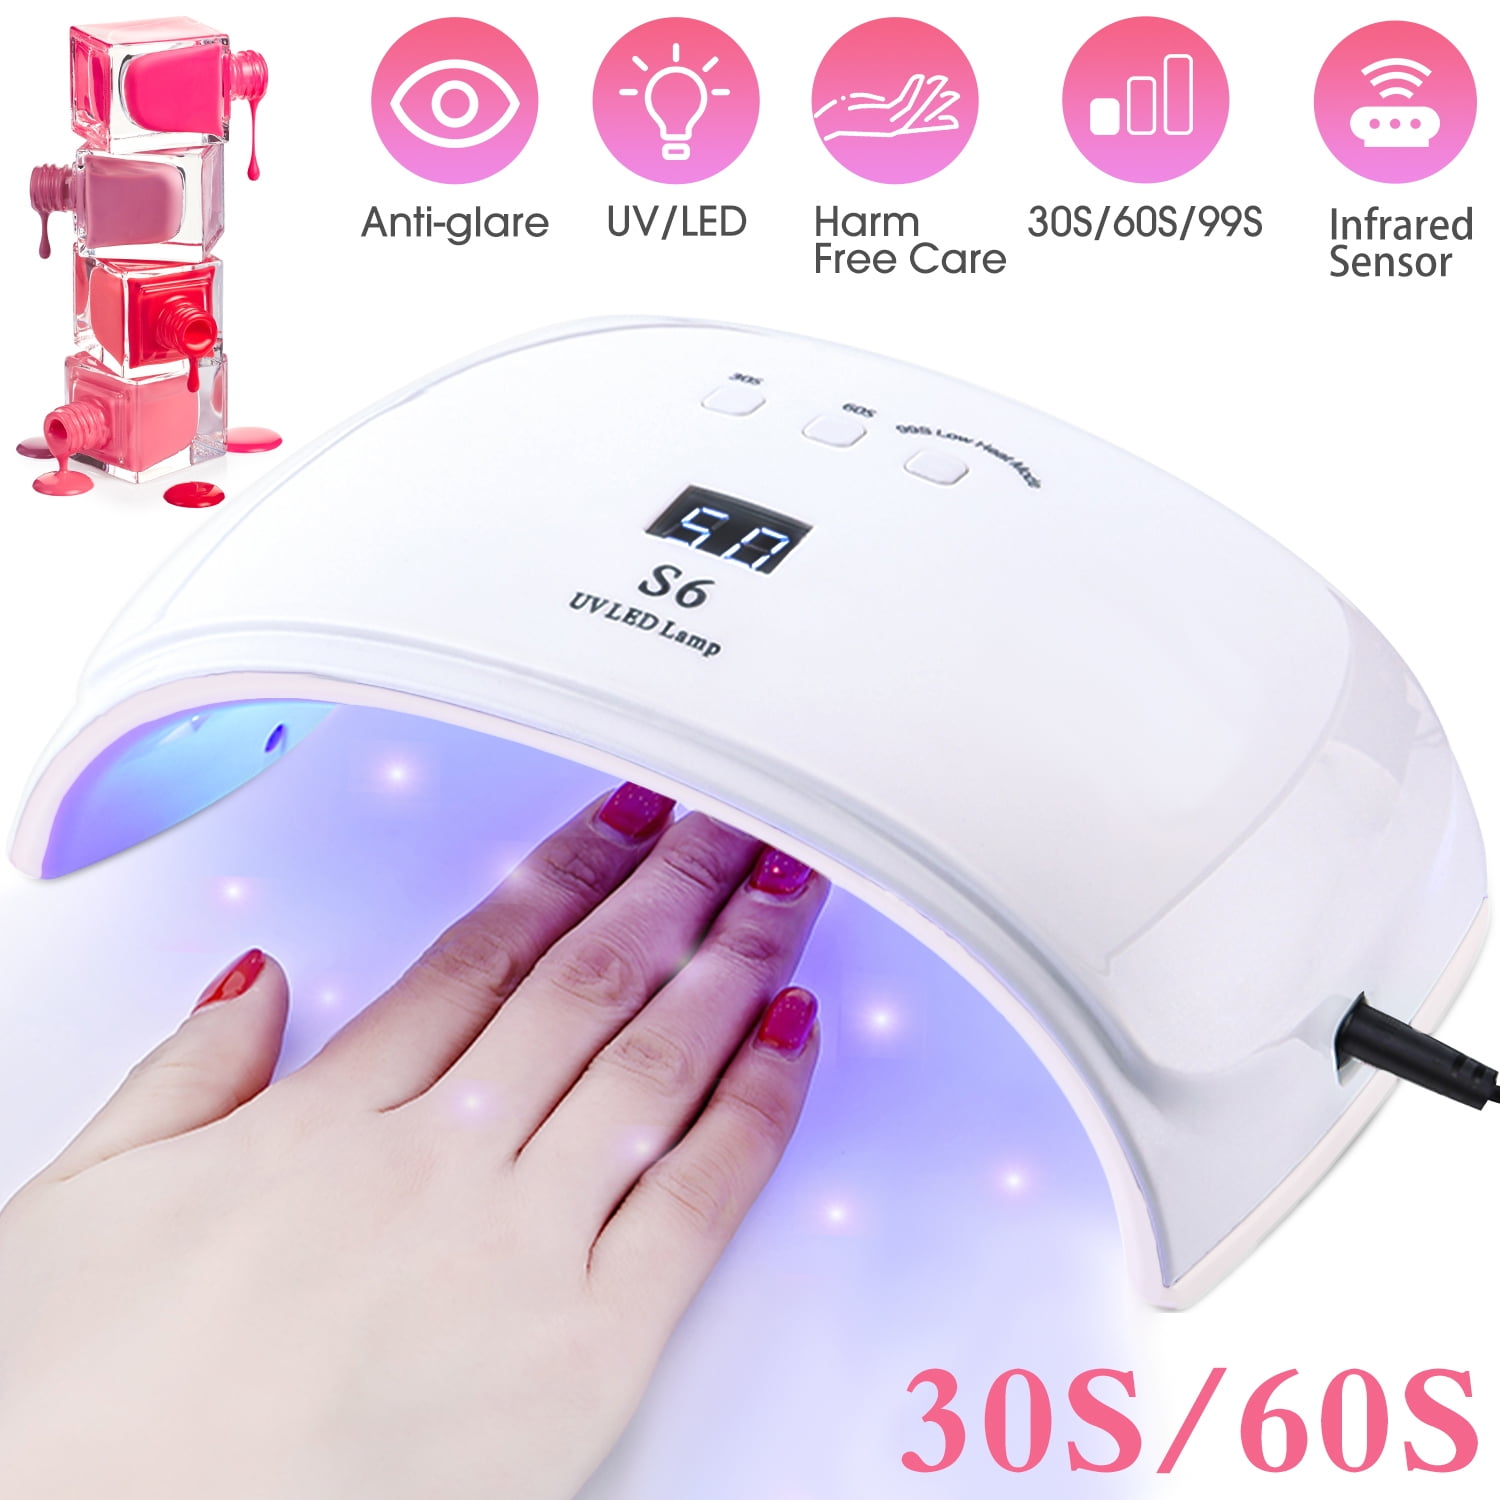 titel vedvarende ressource Ti år UV LED Nail Lamp, 42W Nail Dryer Gel Nail Light for Nail Polish, Light  Curing in 3 Modes for Time, for Manicure Pedicure Nail Art at Home -  Walmart.com